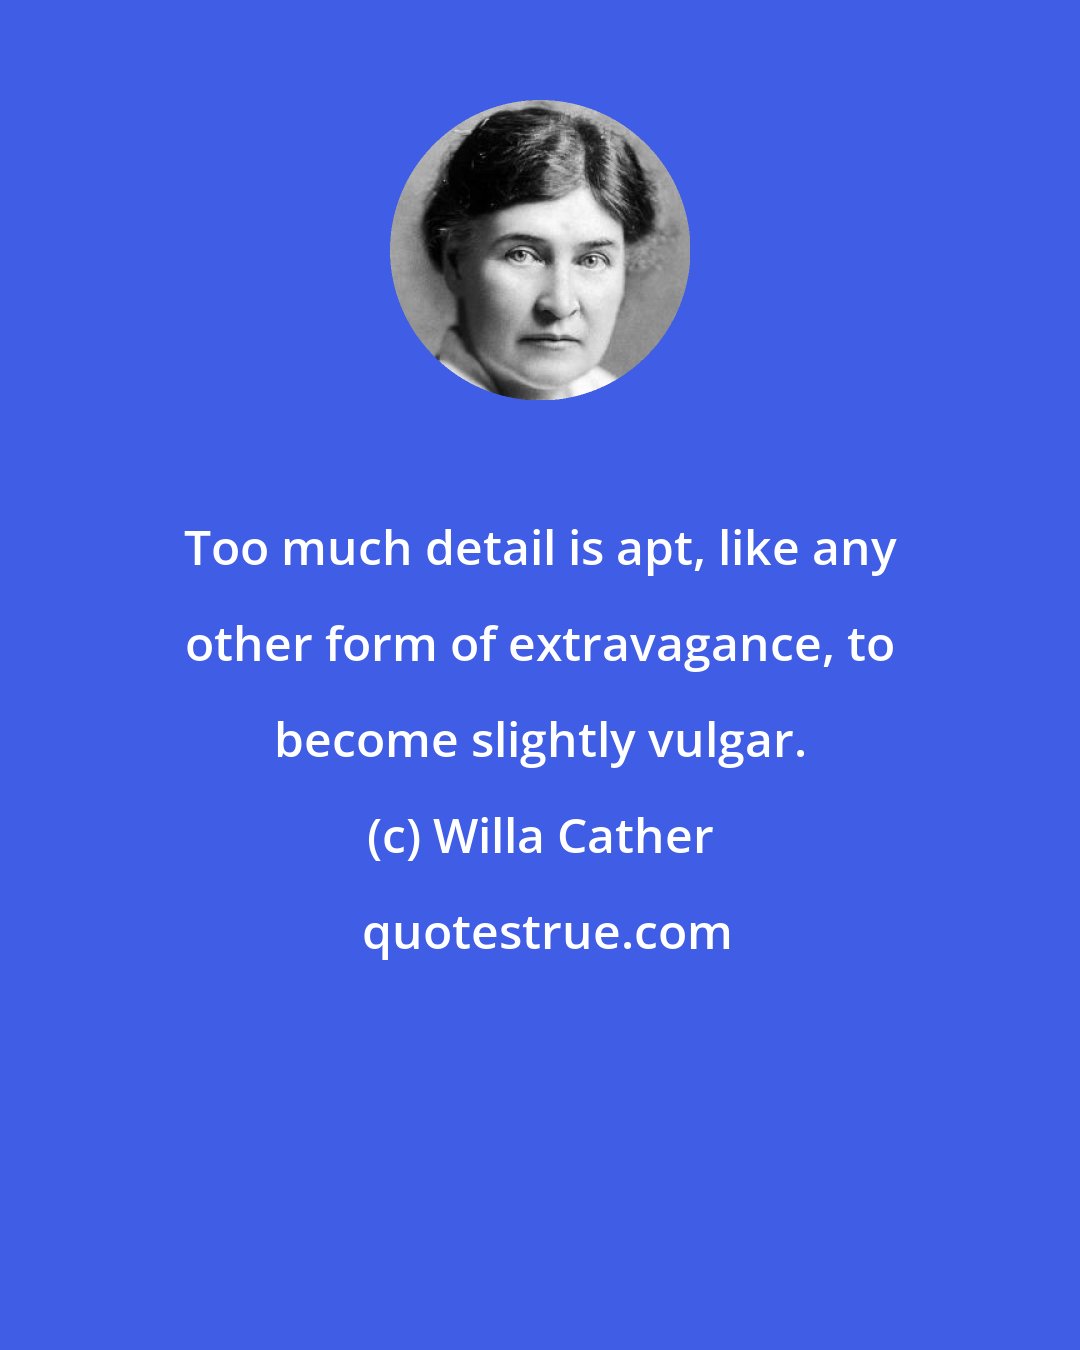 Willa Cather: Too much detail is apt, like any other form of extravagance, to become slightly vulgar.